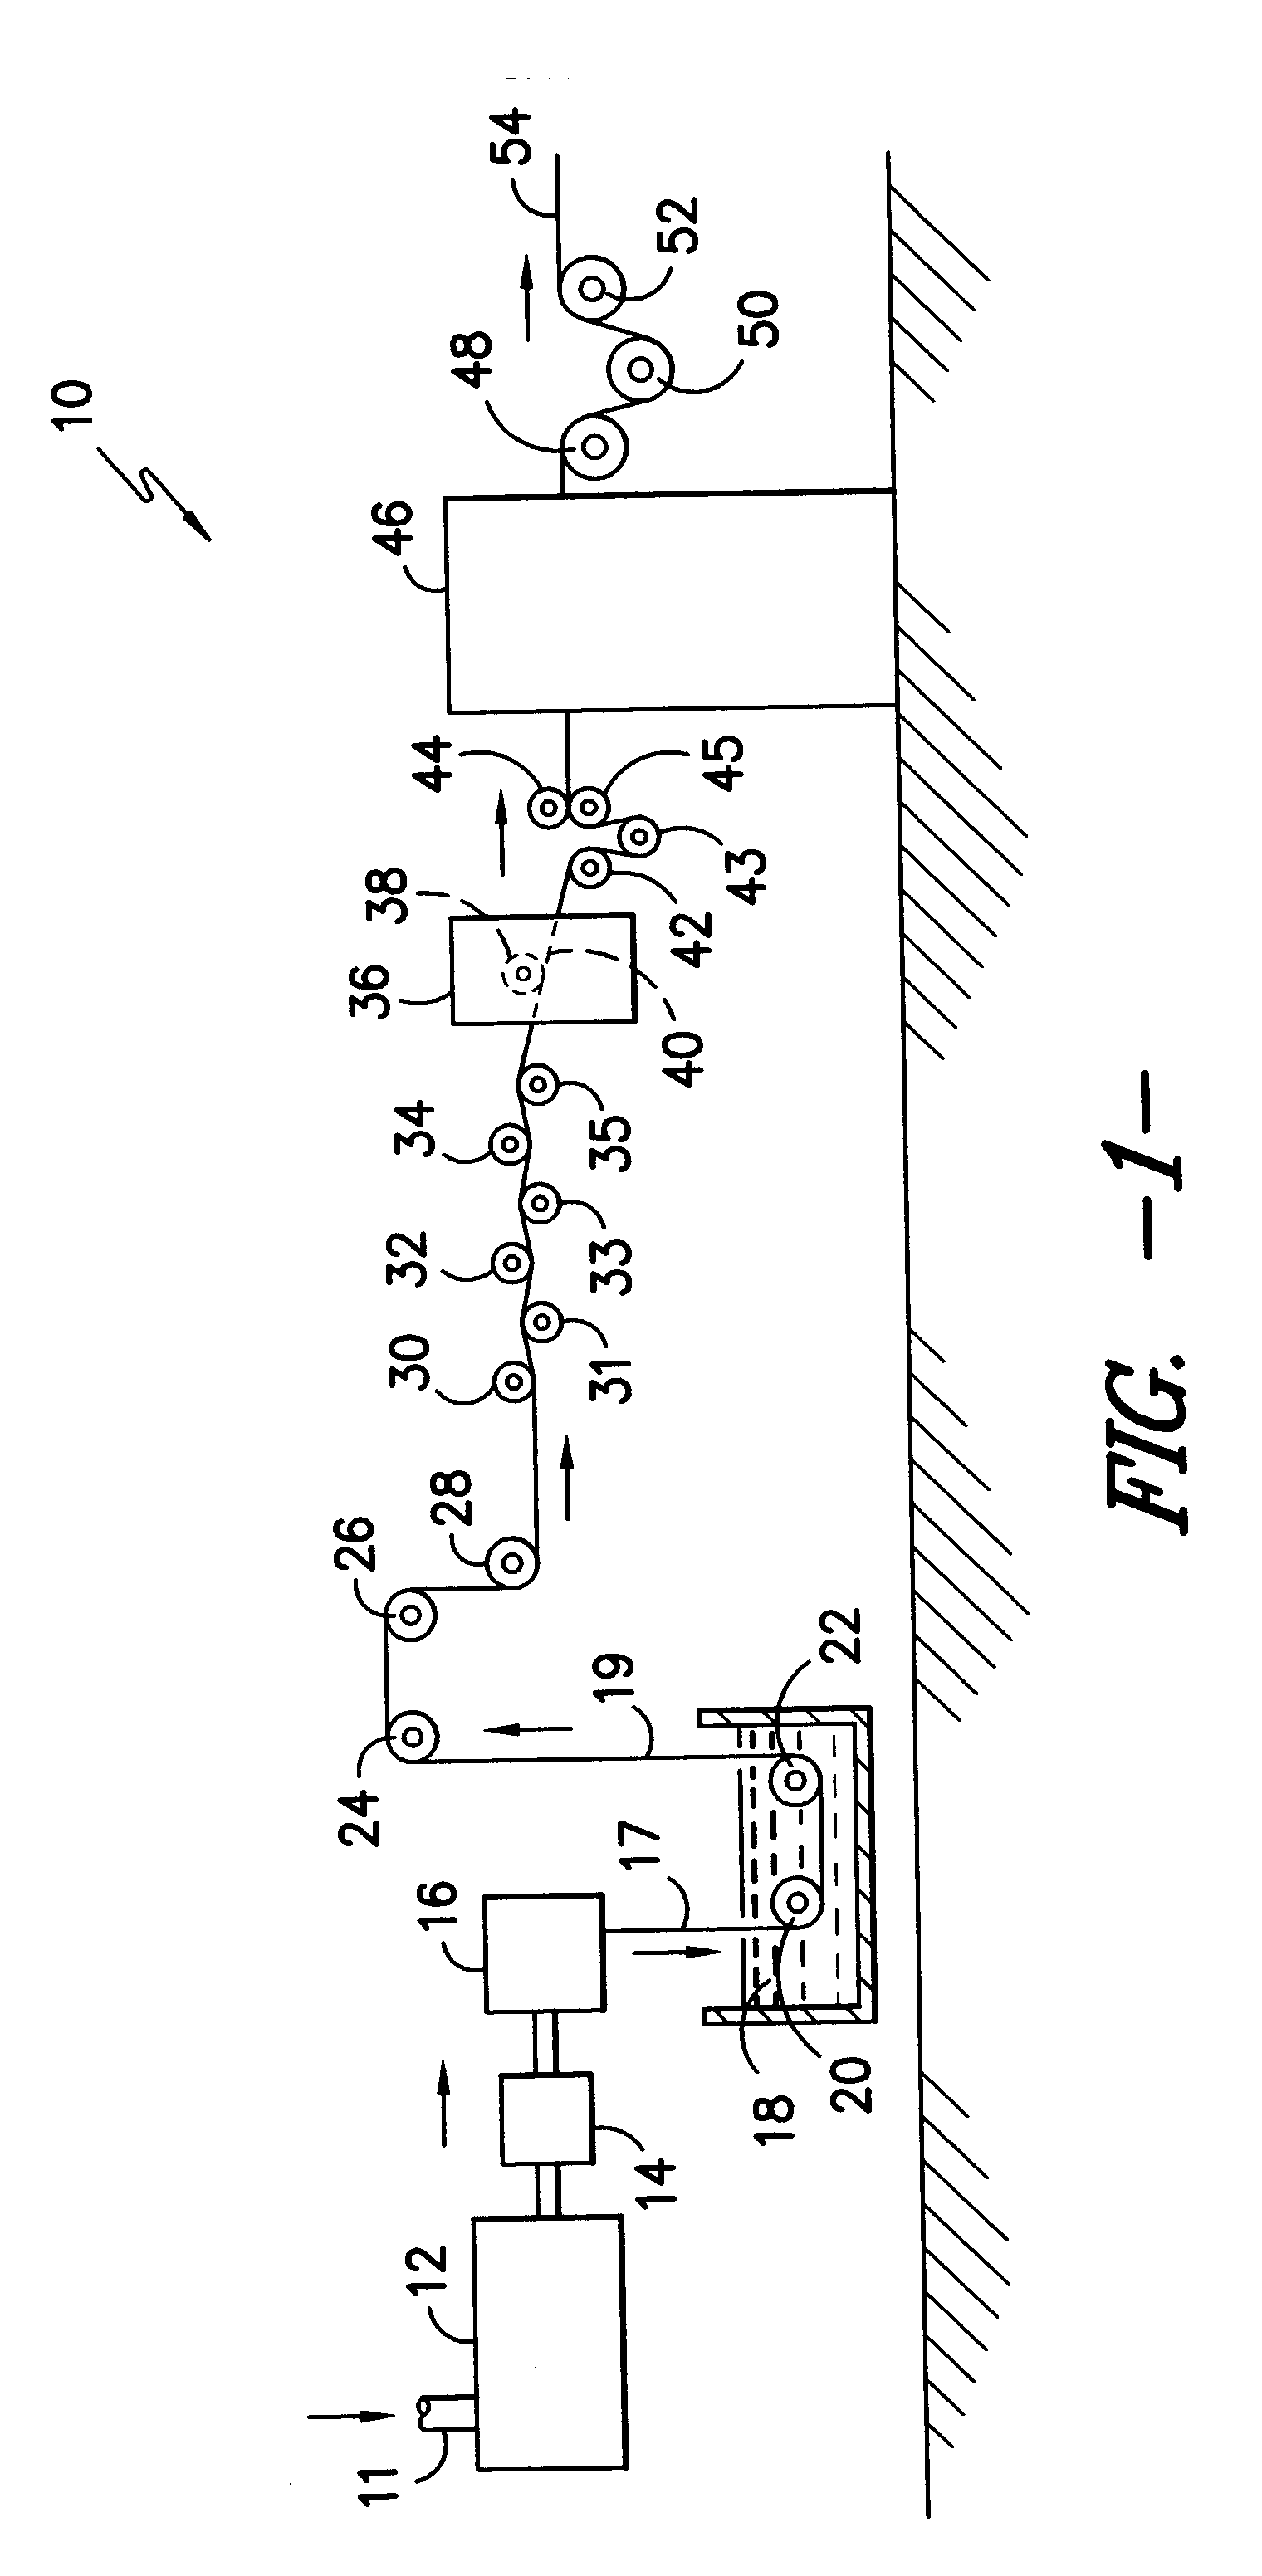 Low-shrink polypropylene tape fibers comprising high amounts of nucleating agents